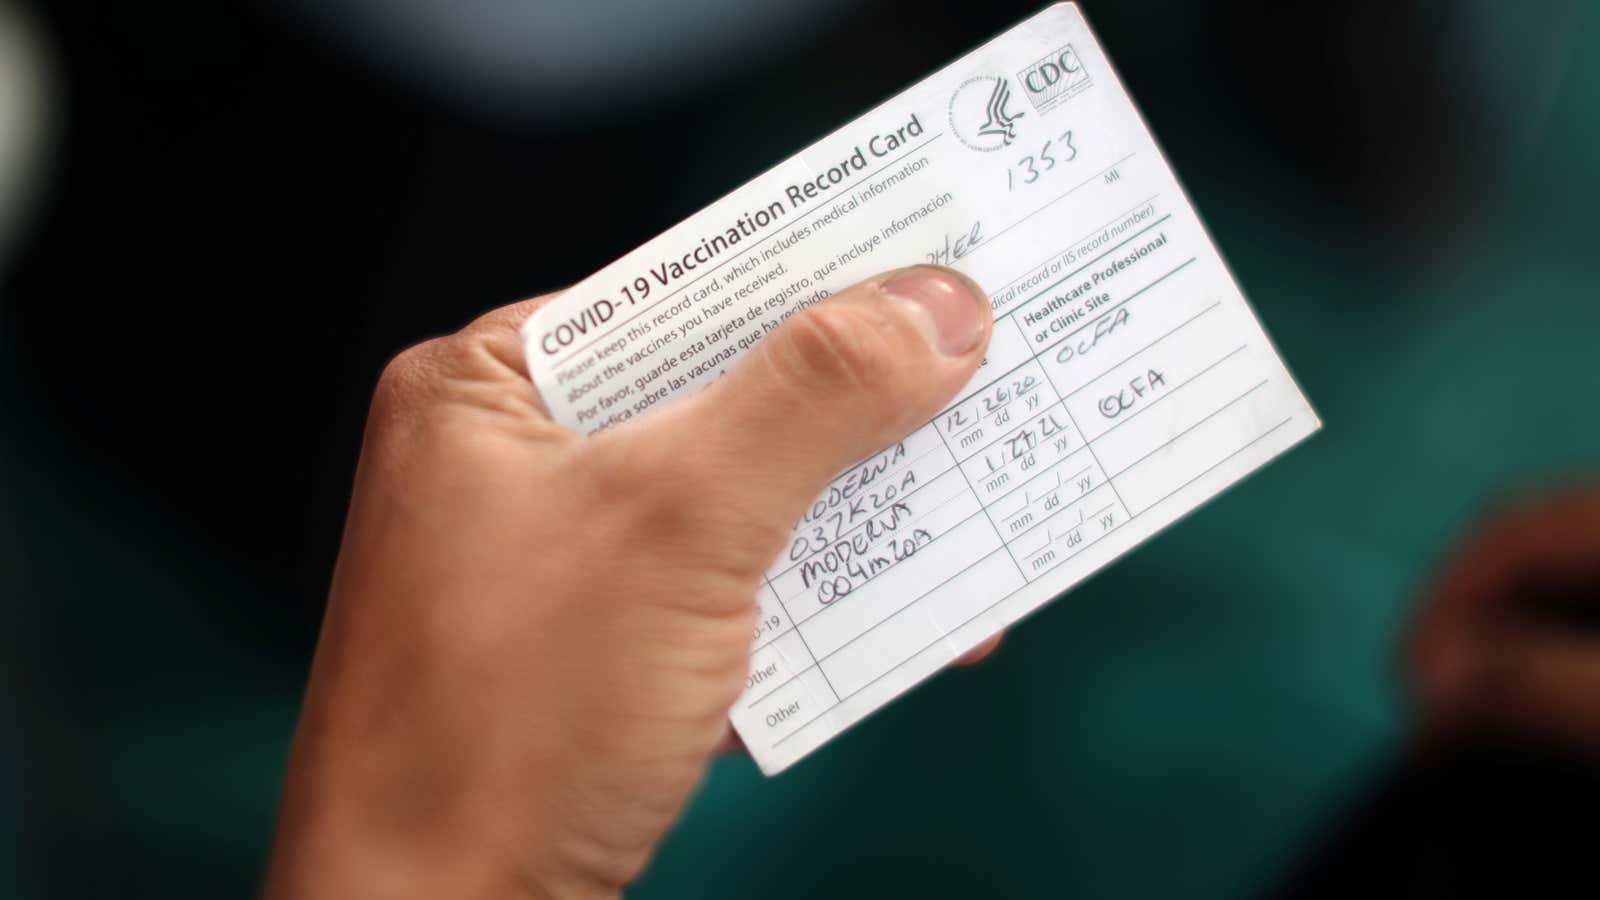 An Orange County firefighter holds his vaccination card after receiving the coronavirus disease (COVID-19) vaccine in Irvine, California, U.S., January 27, 2021.